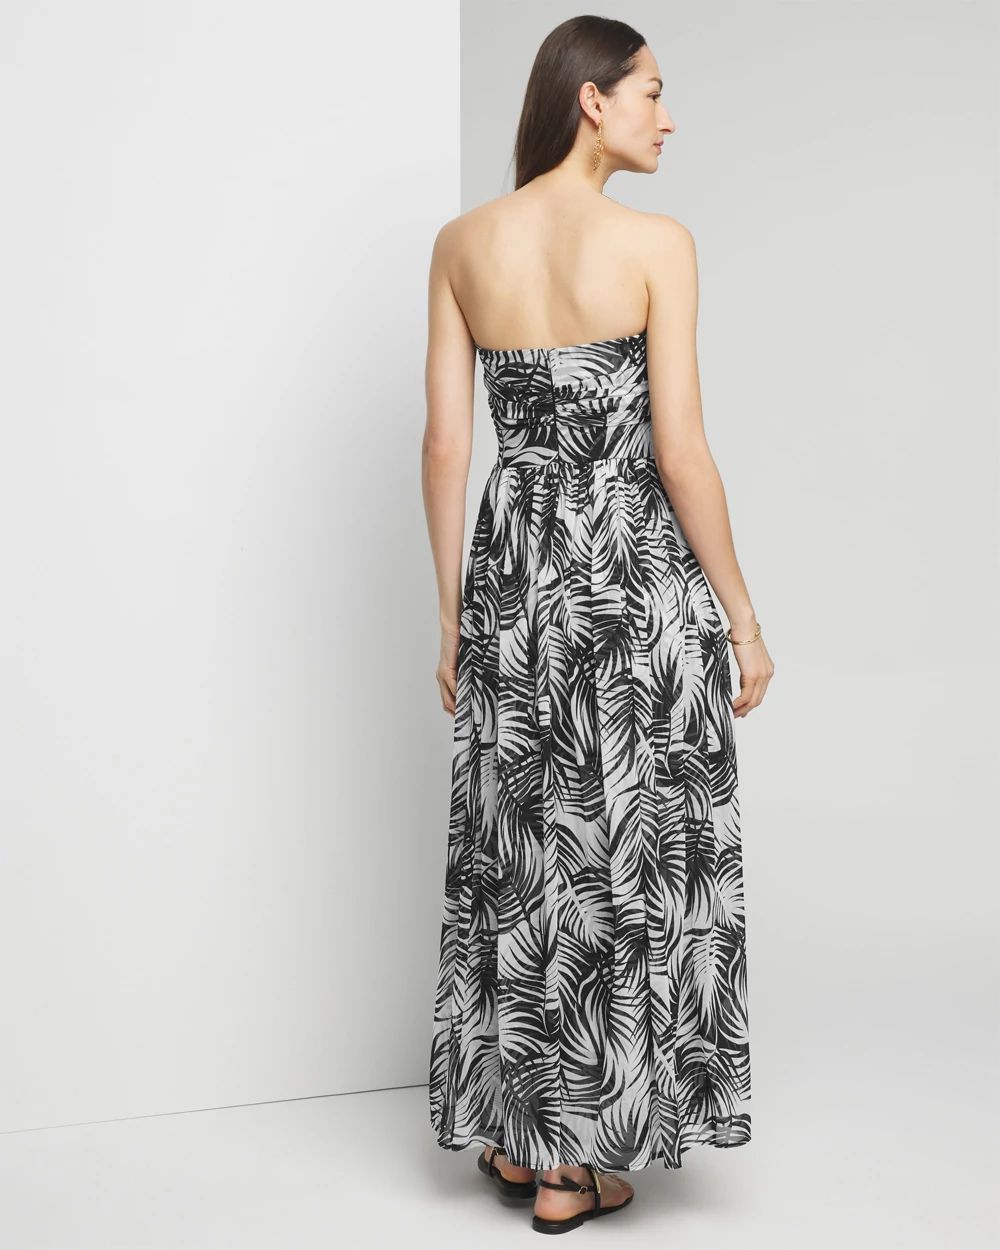 Strapless Mesh Maxi Dress click to view larger image.